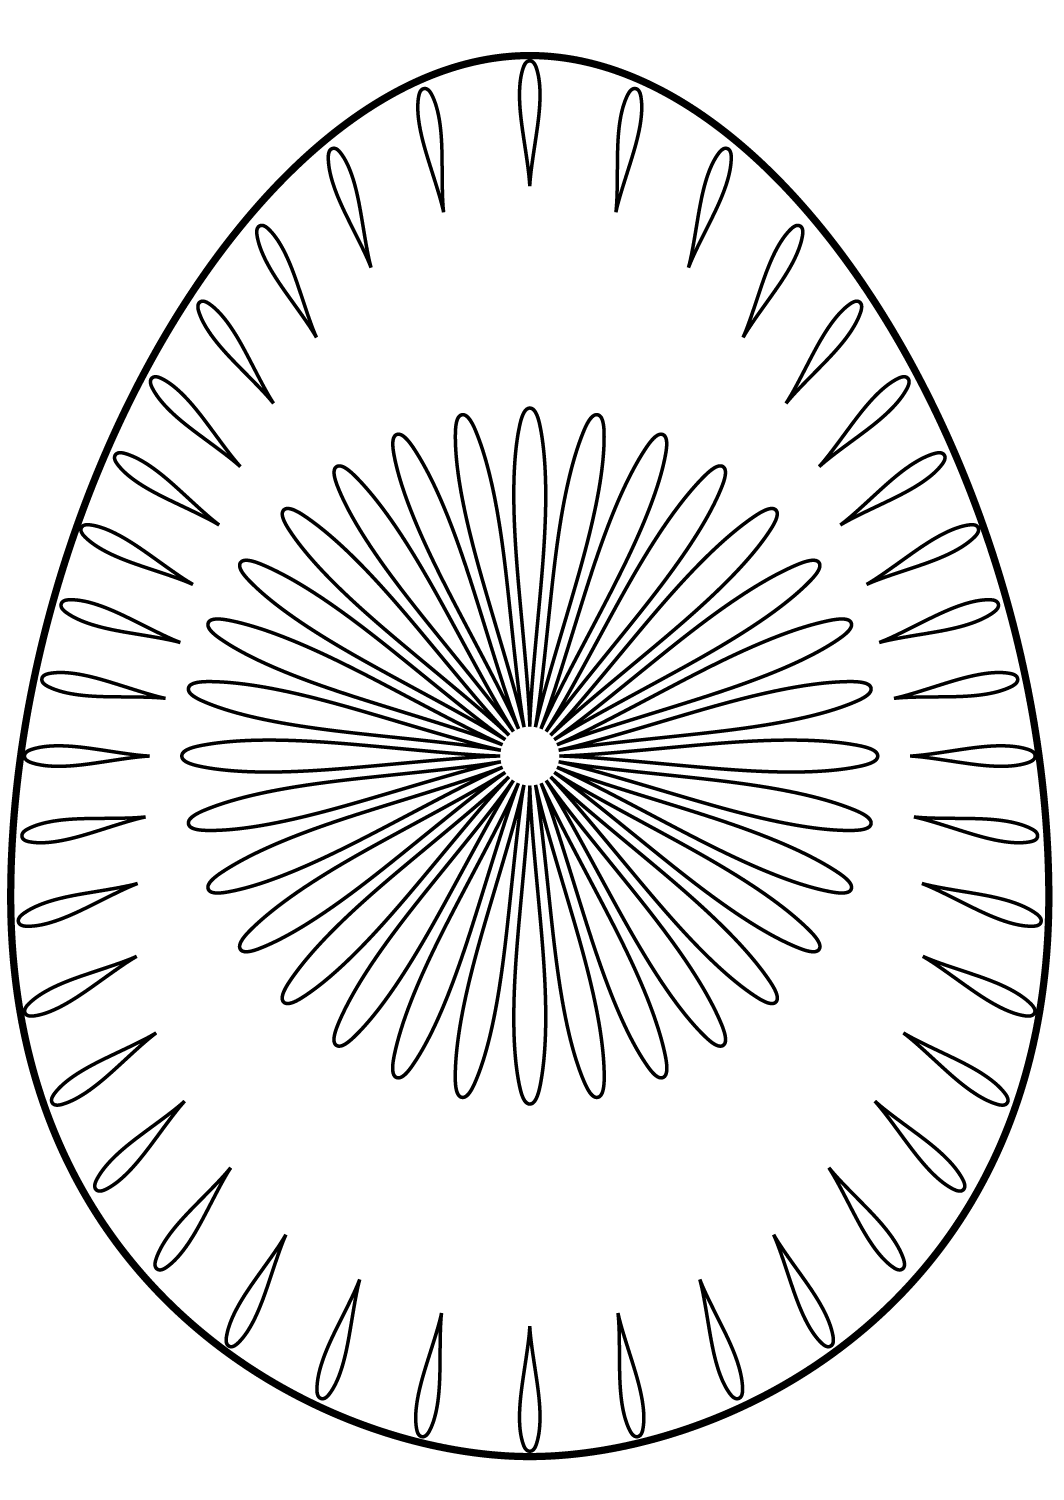 Easter Egg With Flower Pattern 2 Coloring Page